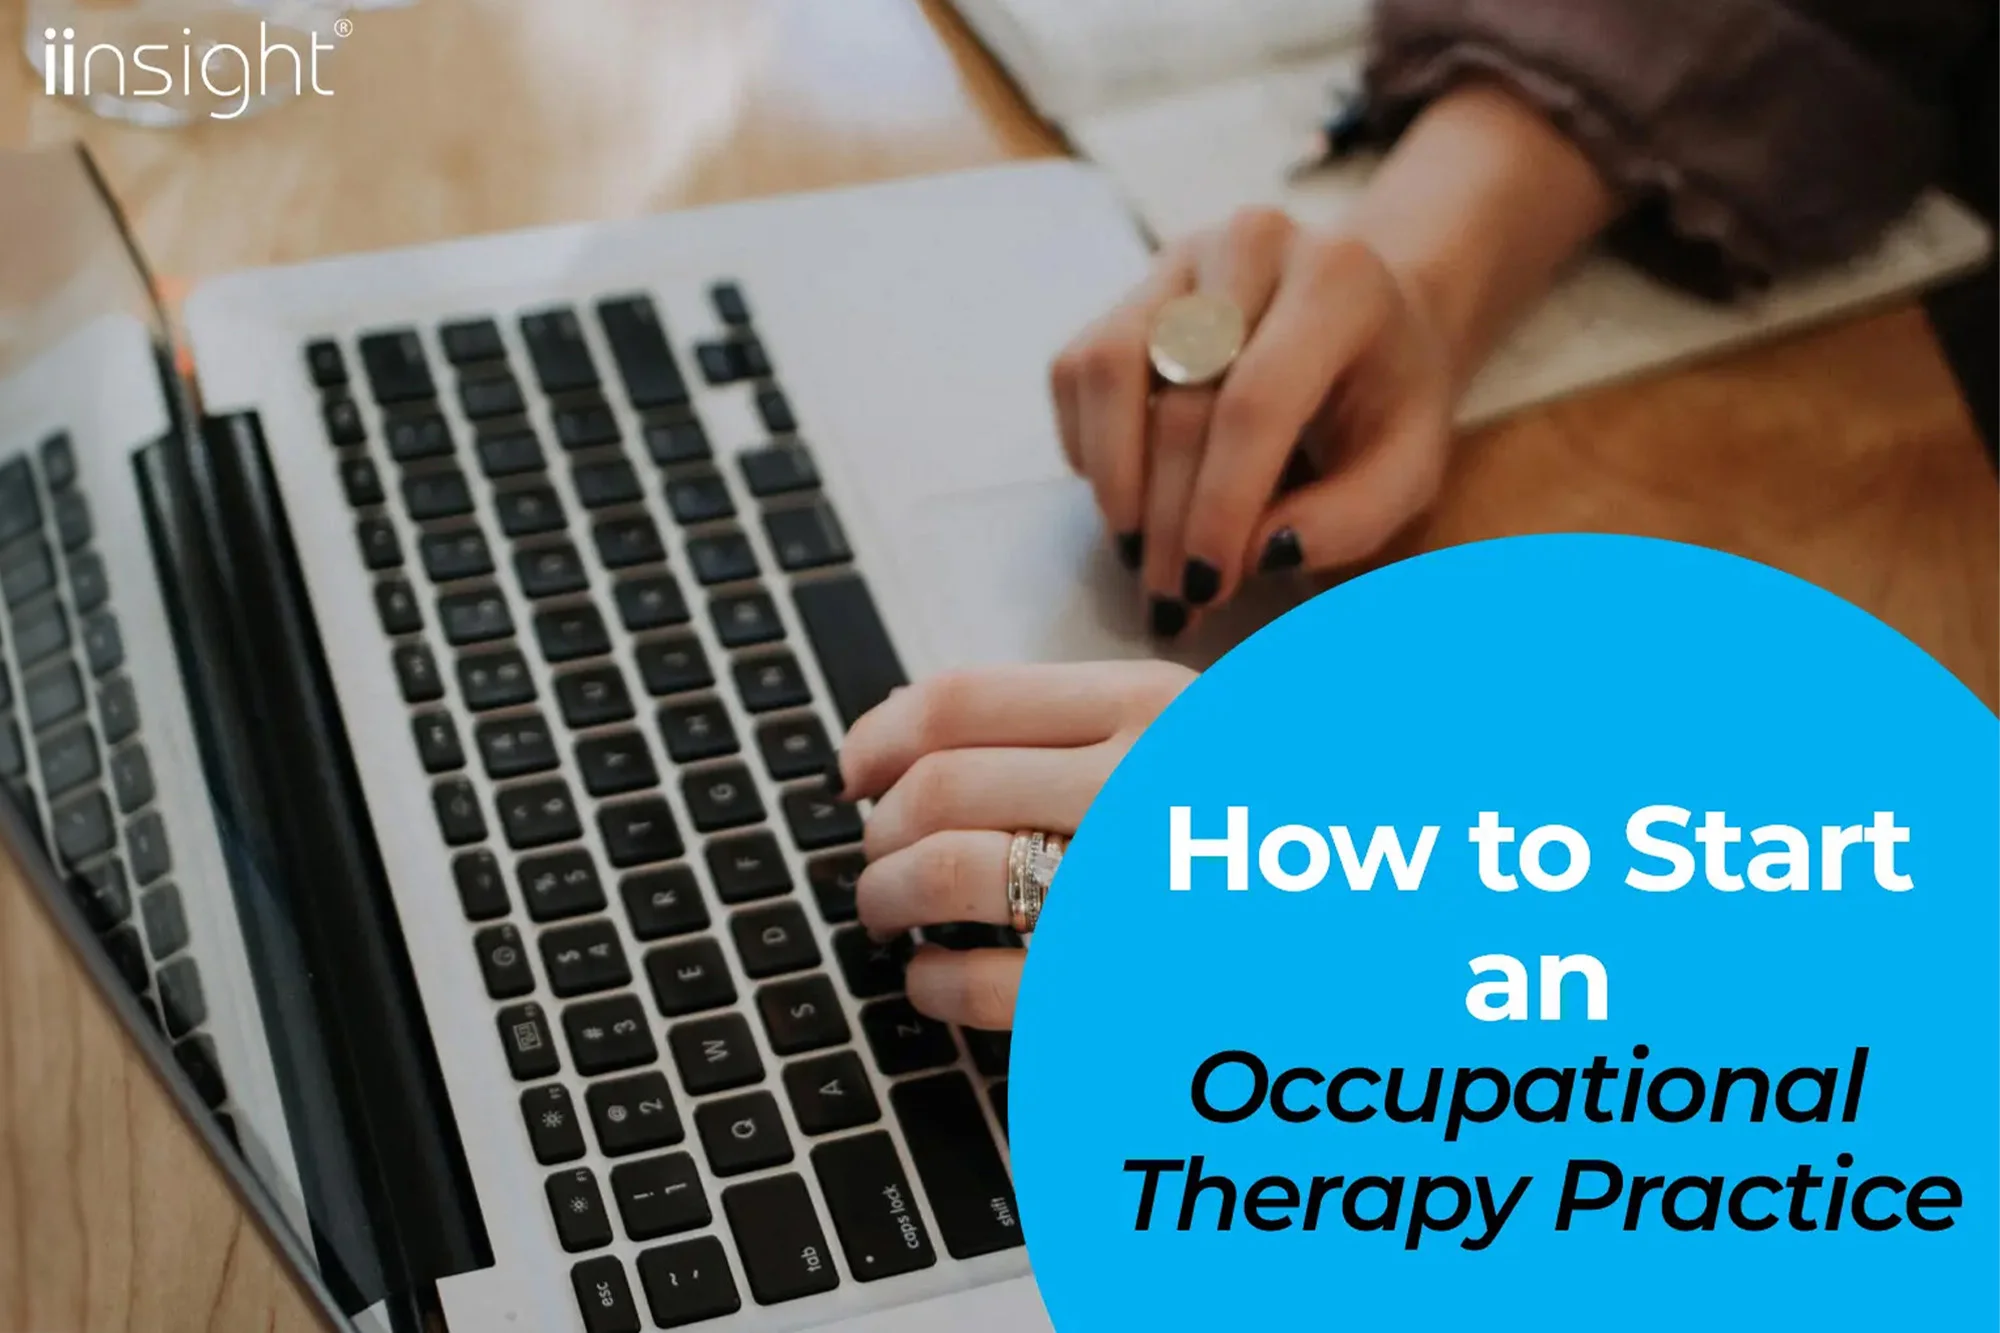 How to Start an Occupational Therapy Practice